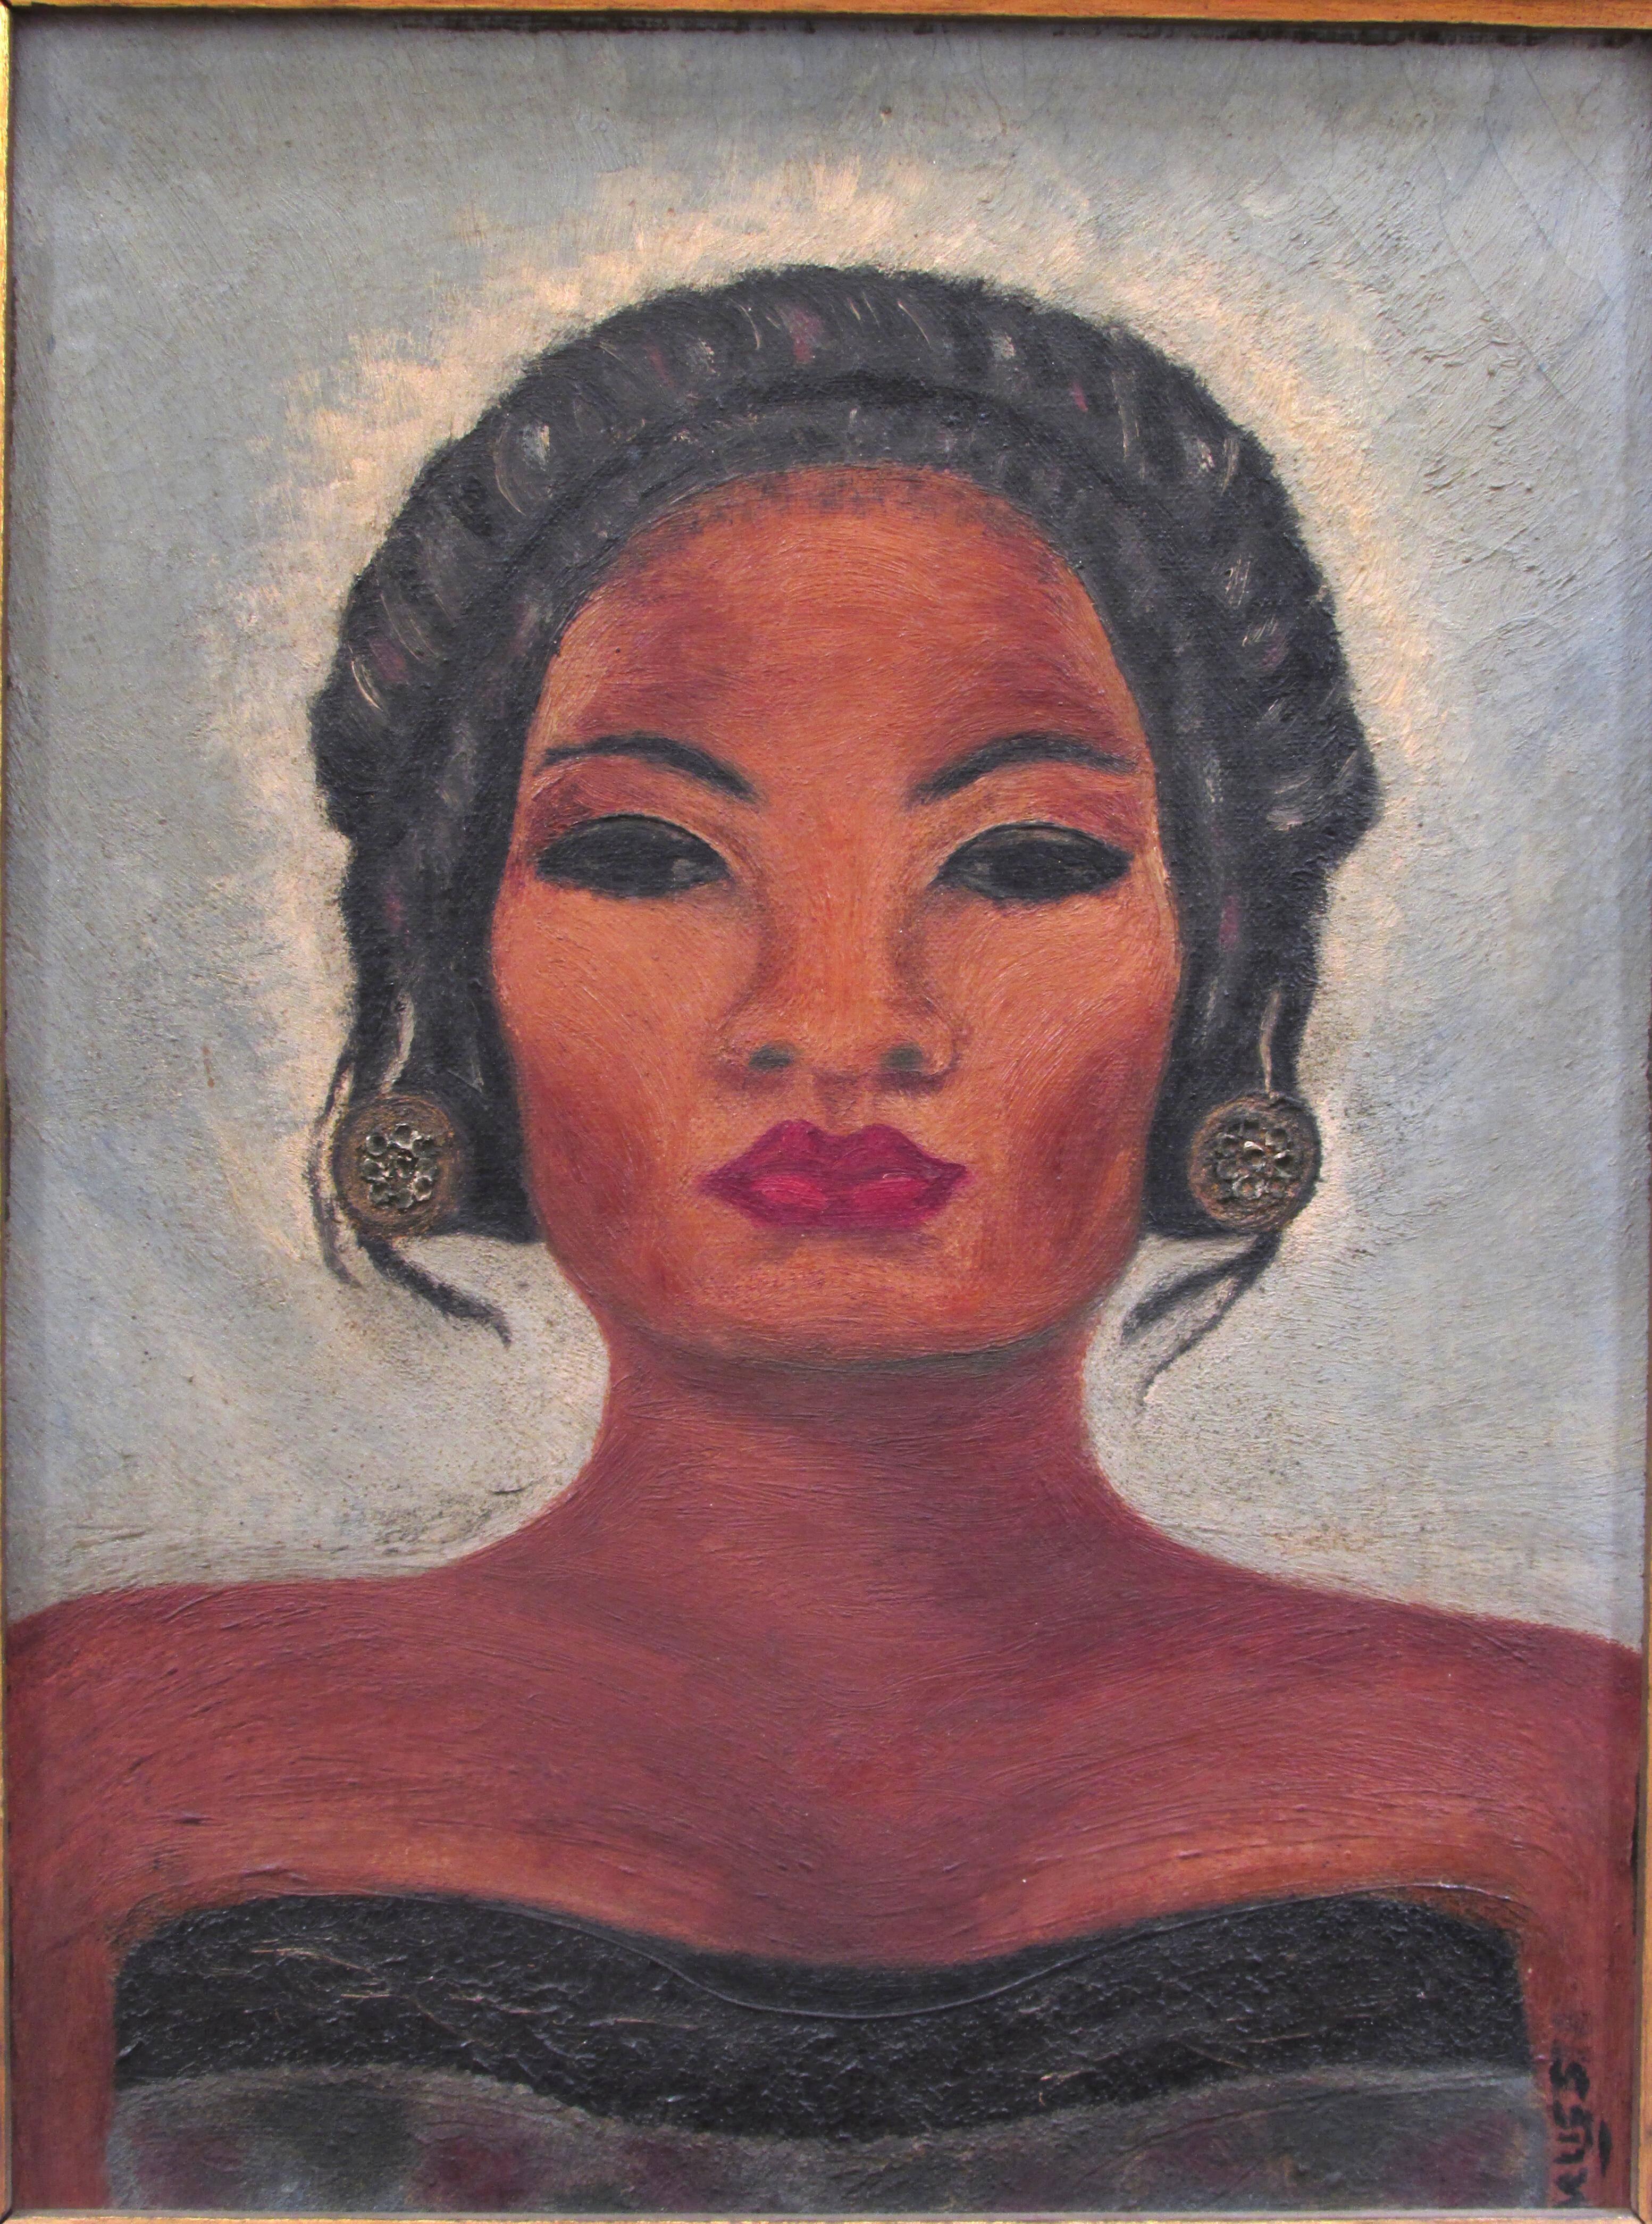 Polynesia exotic portrait dates from 1920s in 1970s black and gilt frame on a measure 9 inch by 12 inch canvas panel illegibly signed lower right.